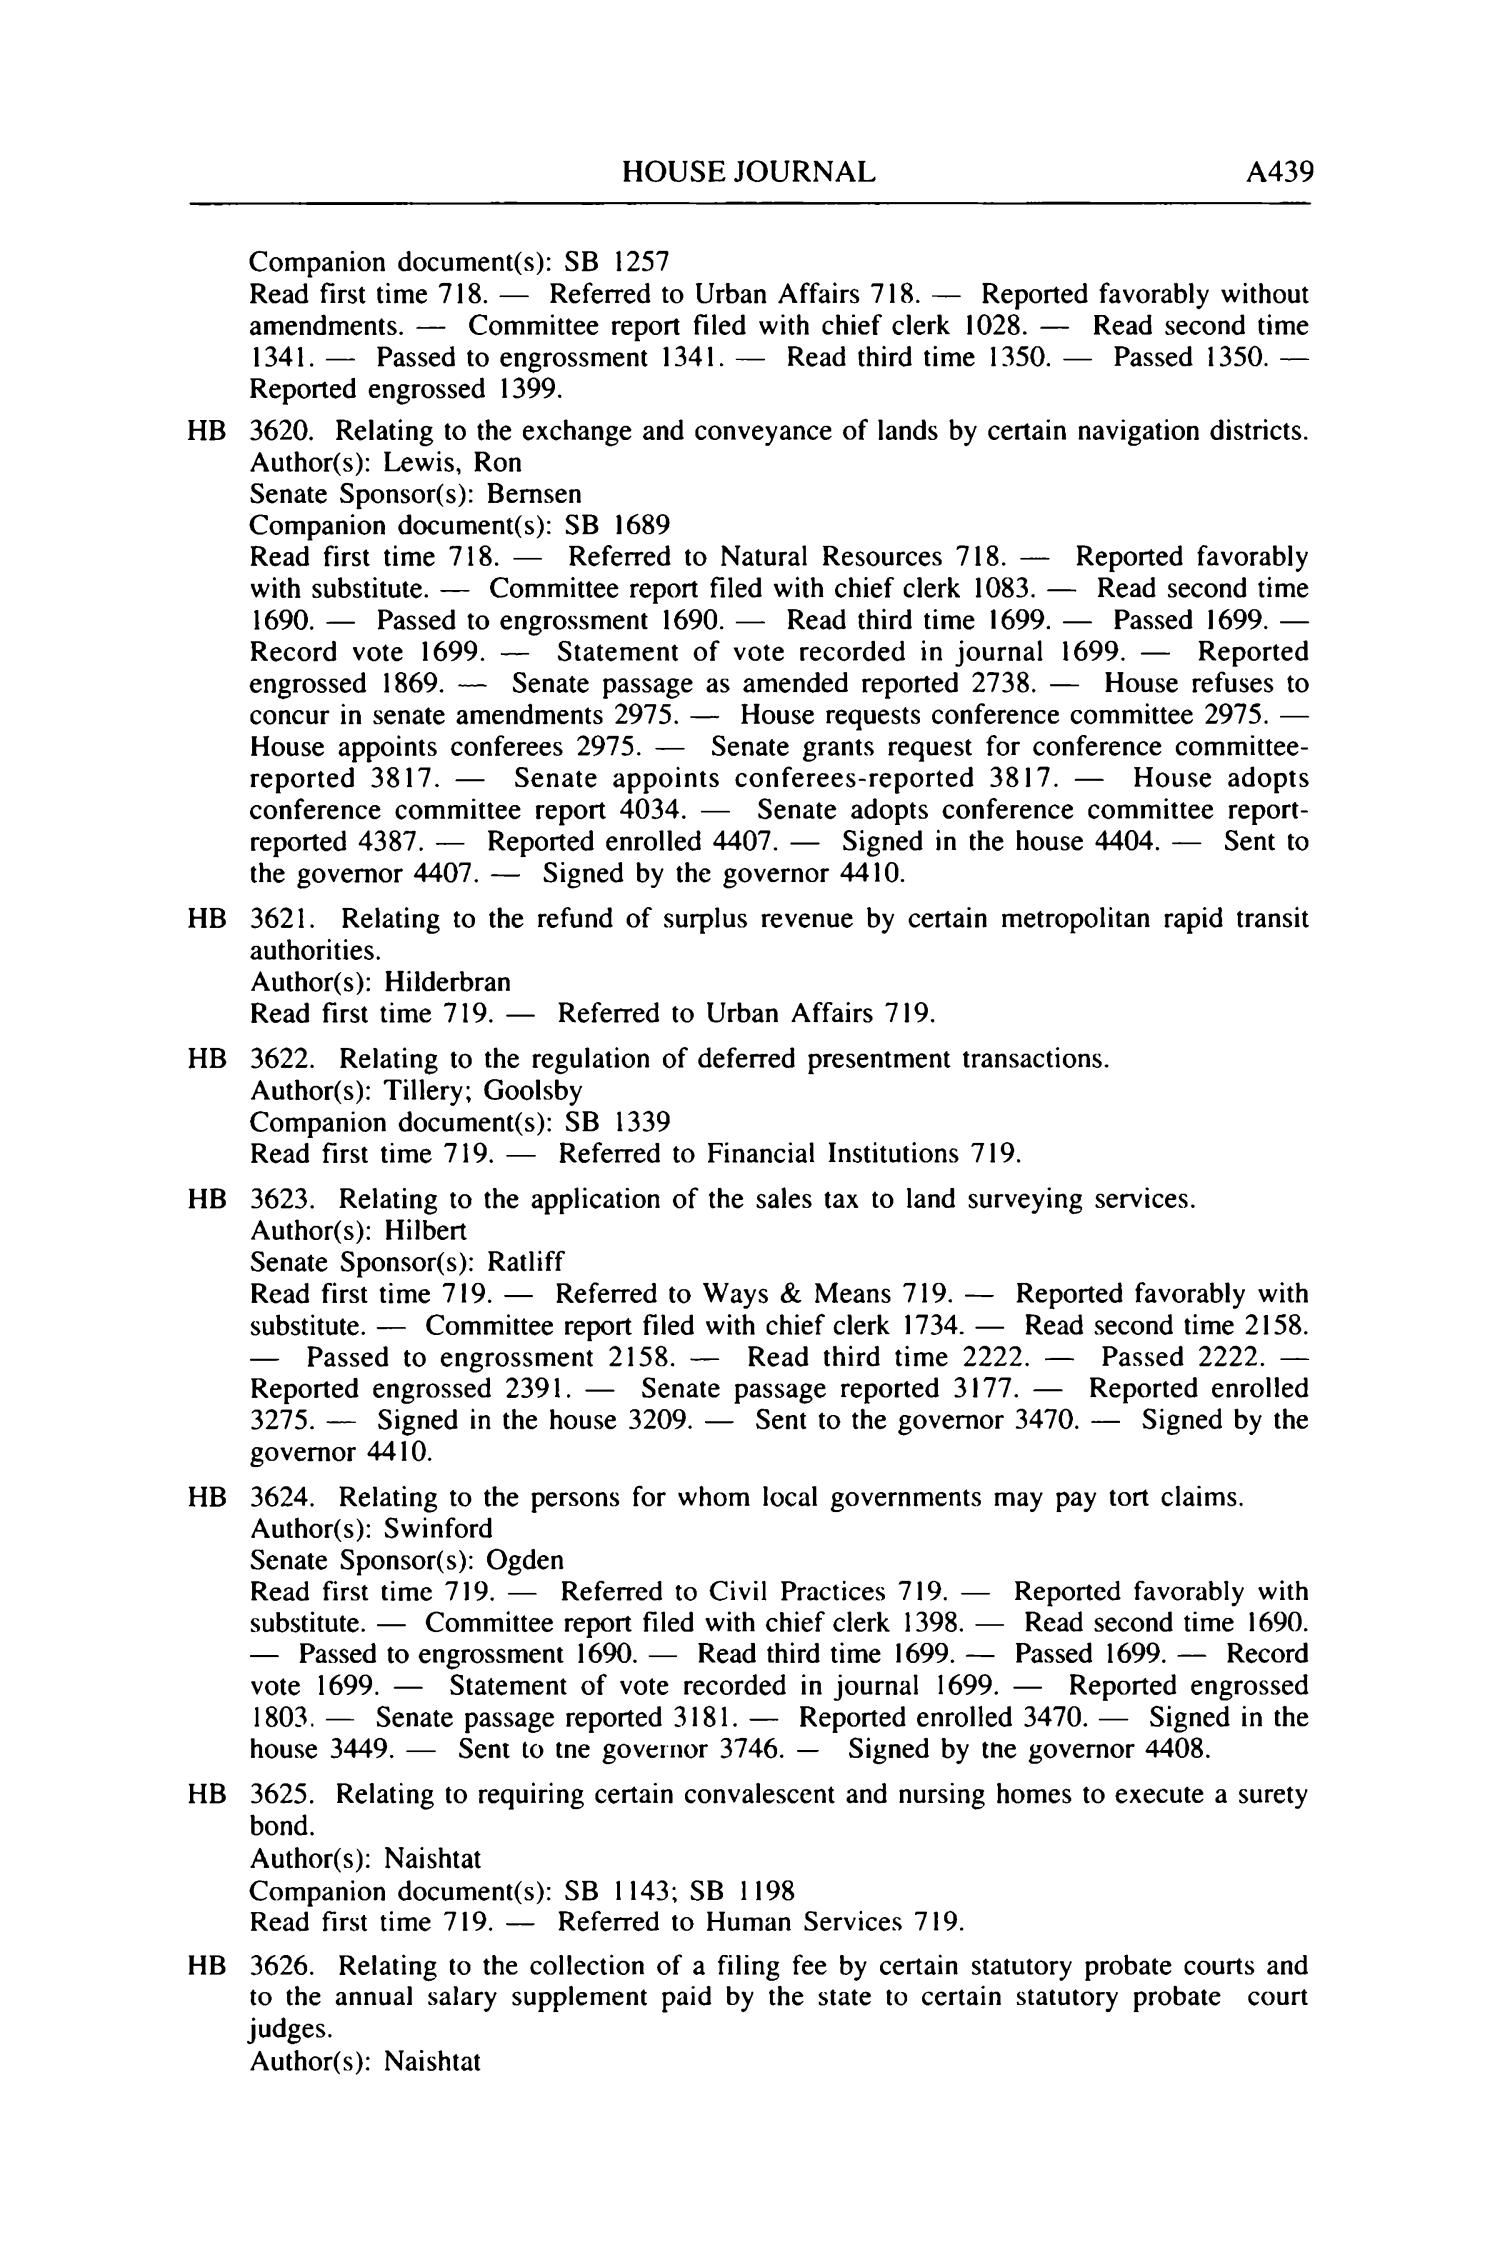 Journal of the House of Representatives of the Regular Session of the Seventy-Sixth Legislature of the State of Texas, Volume 5
                                                
                                                    A439
                                                